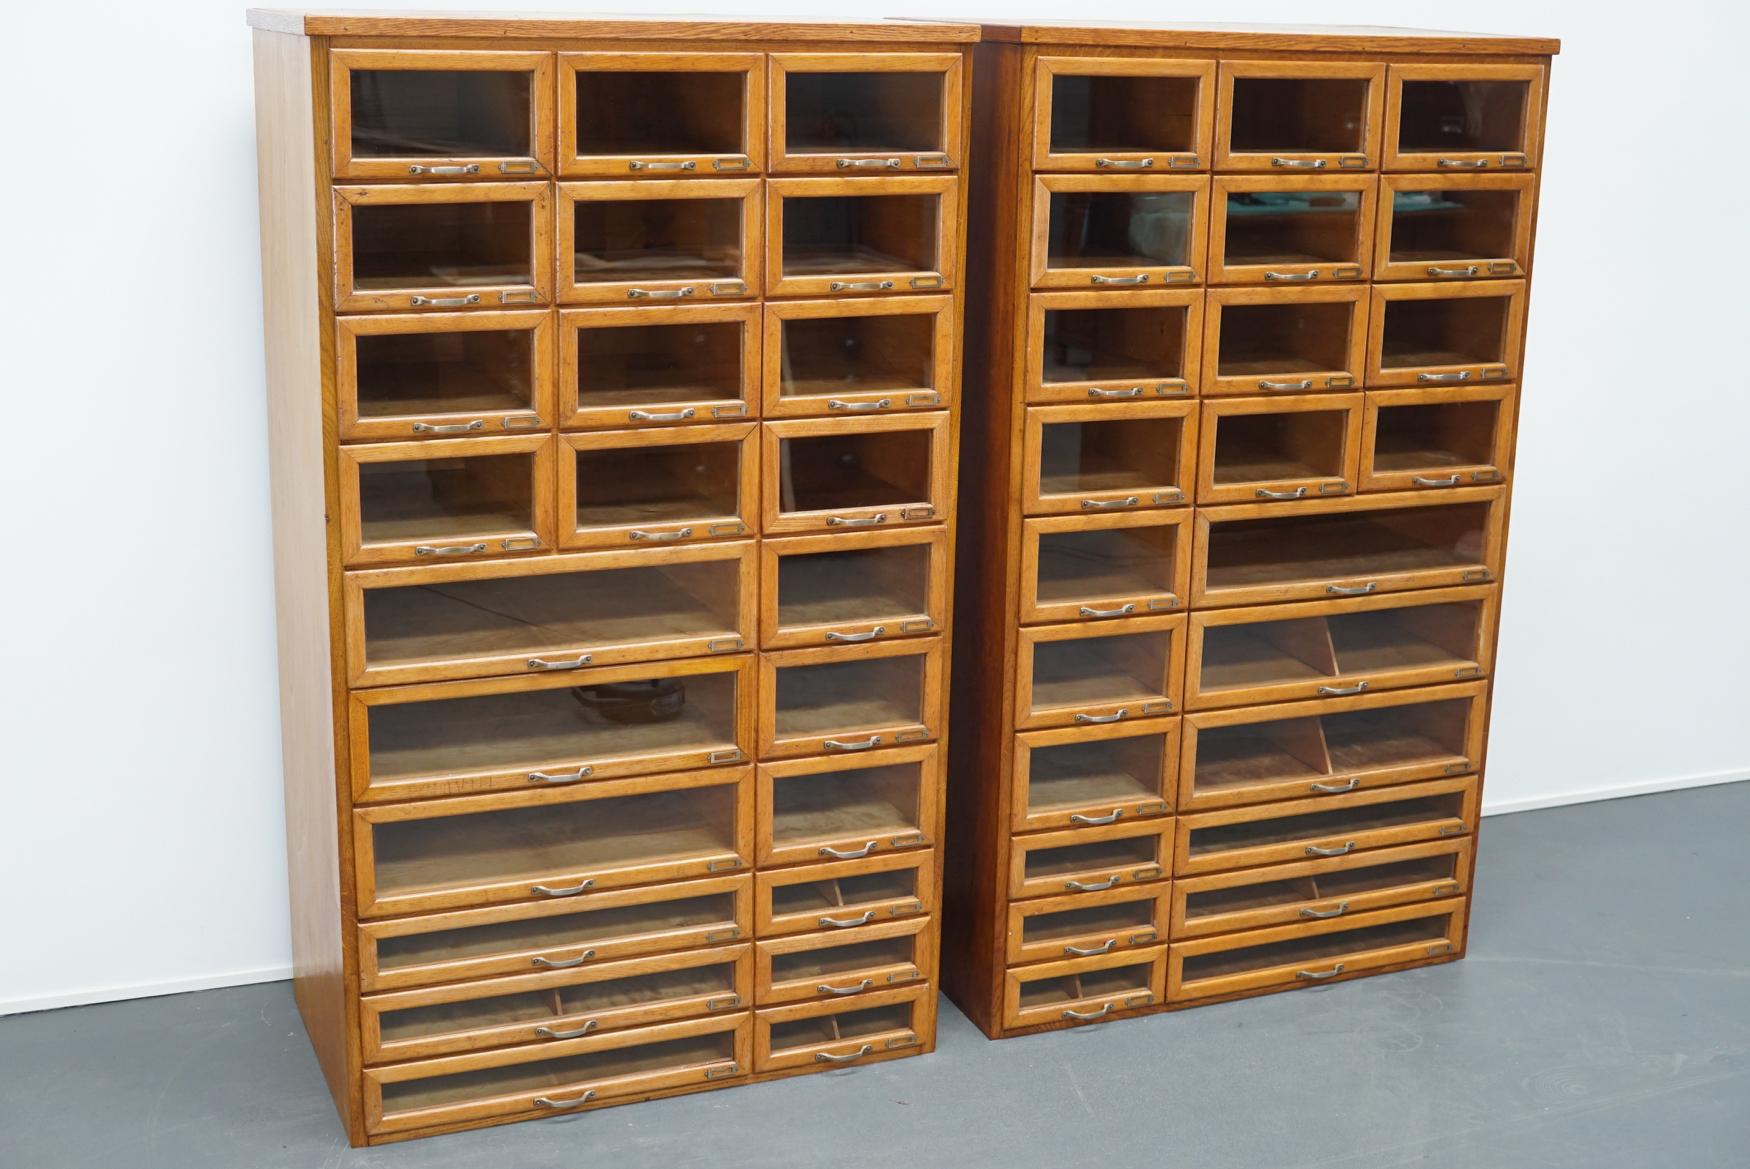 These vintage haberdashery shop cabinets originate from the United Kingdom. The pieces are made from oak and feature 24 drawers each in different sizes. The price listed is for one cabinet and they will be sold separately or together as a pair.